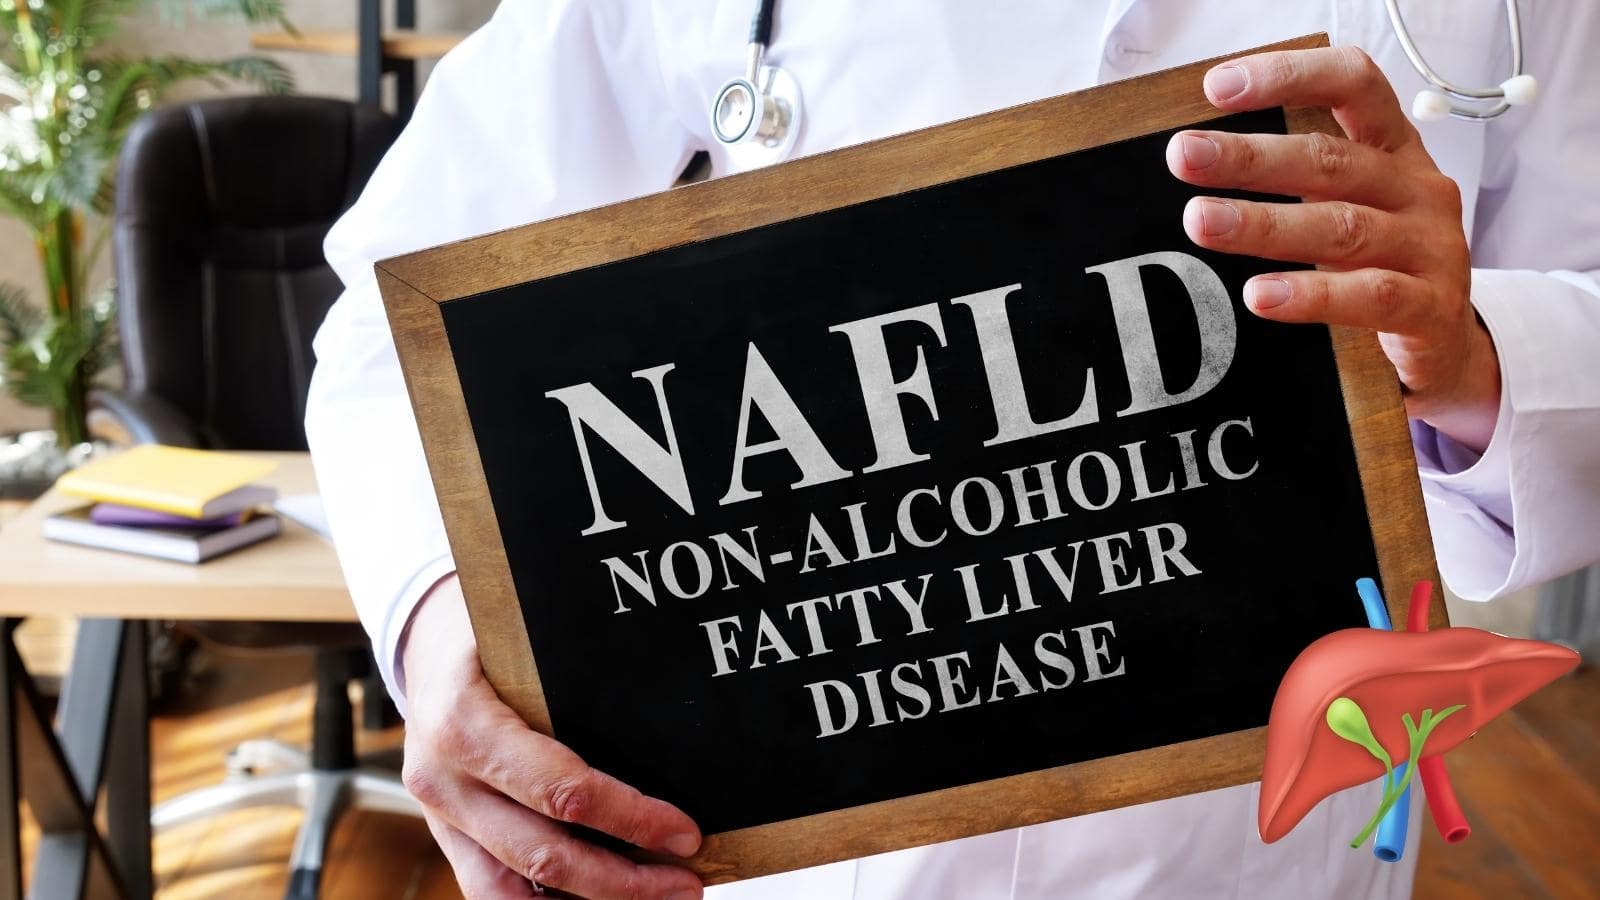 Can Menopause Cause Fatty Liver? The Health Problems and Natural Remedies for Fatty Liver